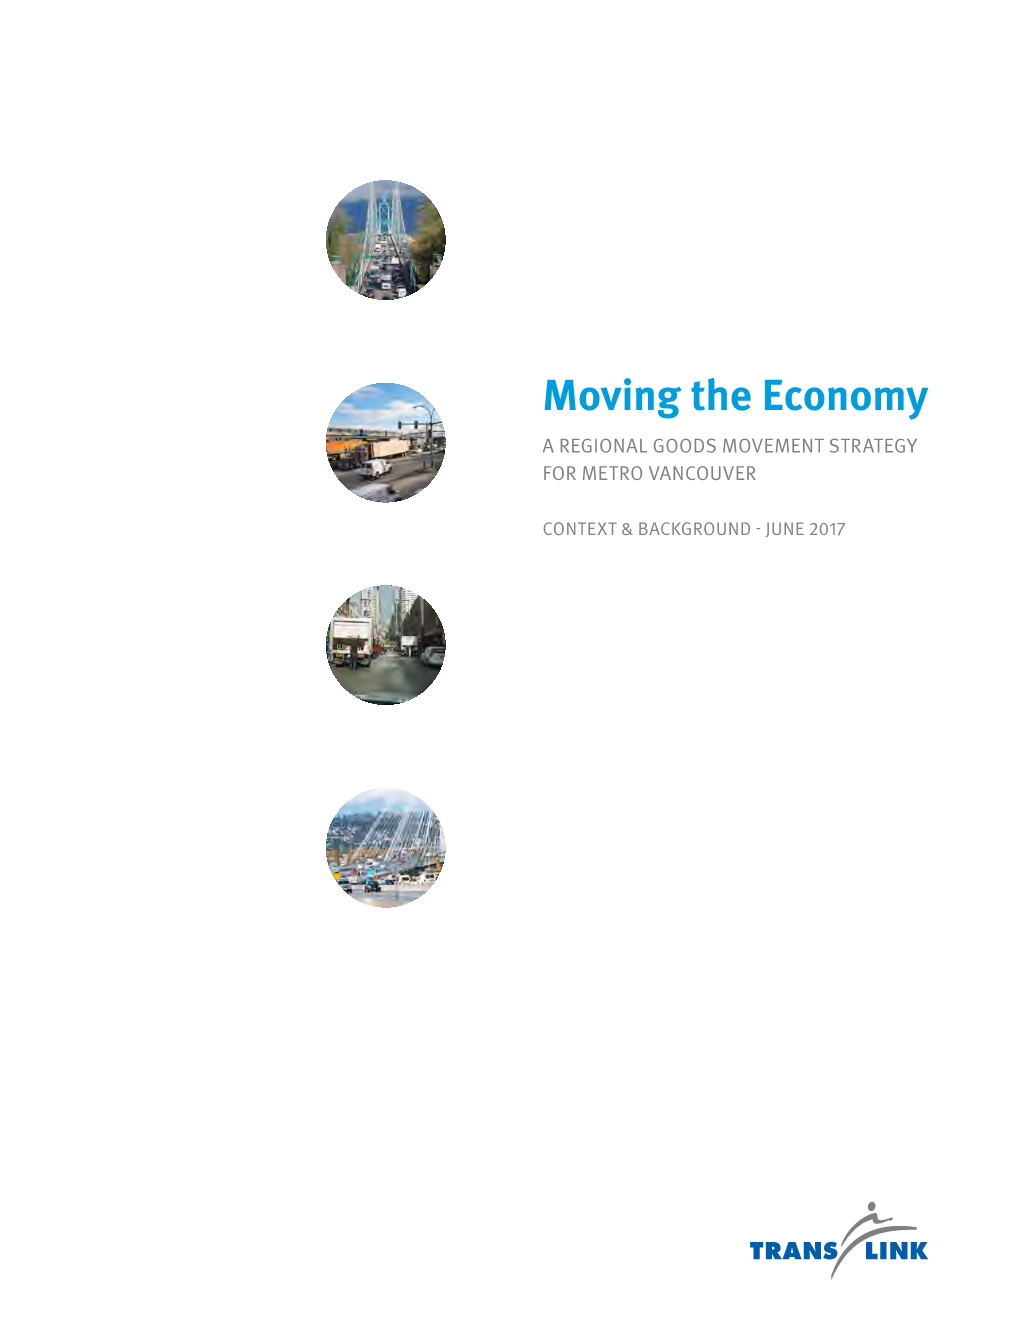 Moving the Economy a REGIONAL GOODS MOVEMENT STRATEGY for METRO VANCOUVER